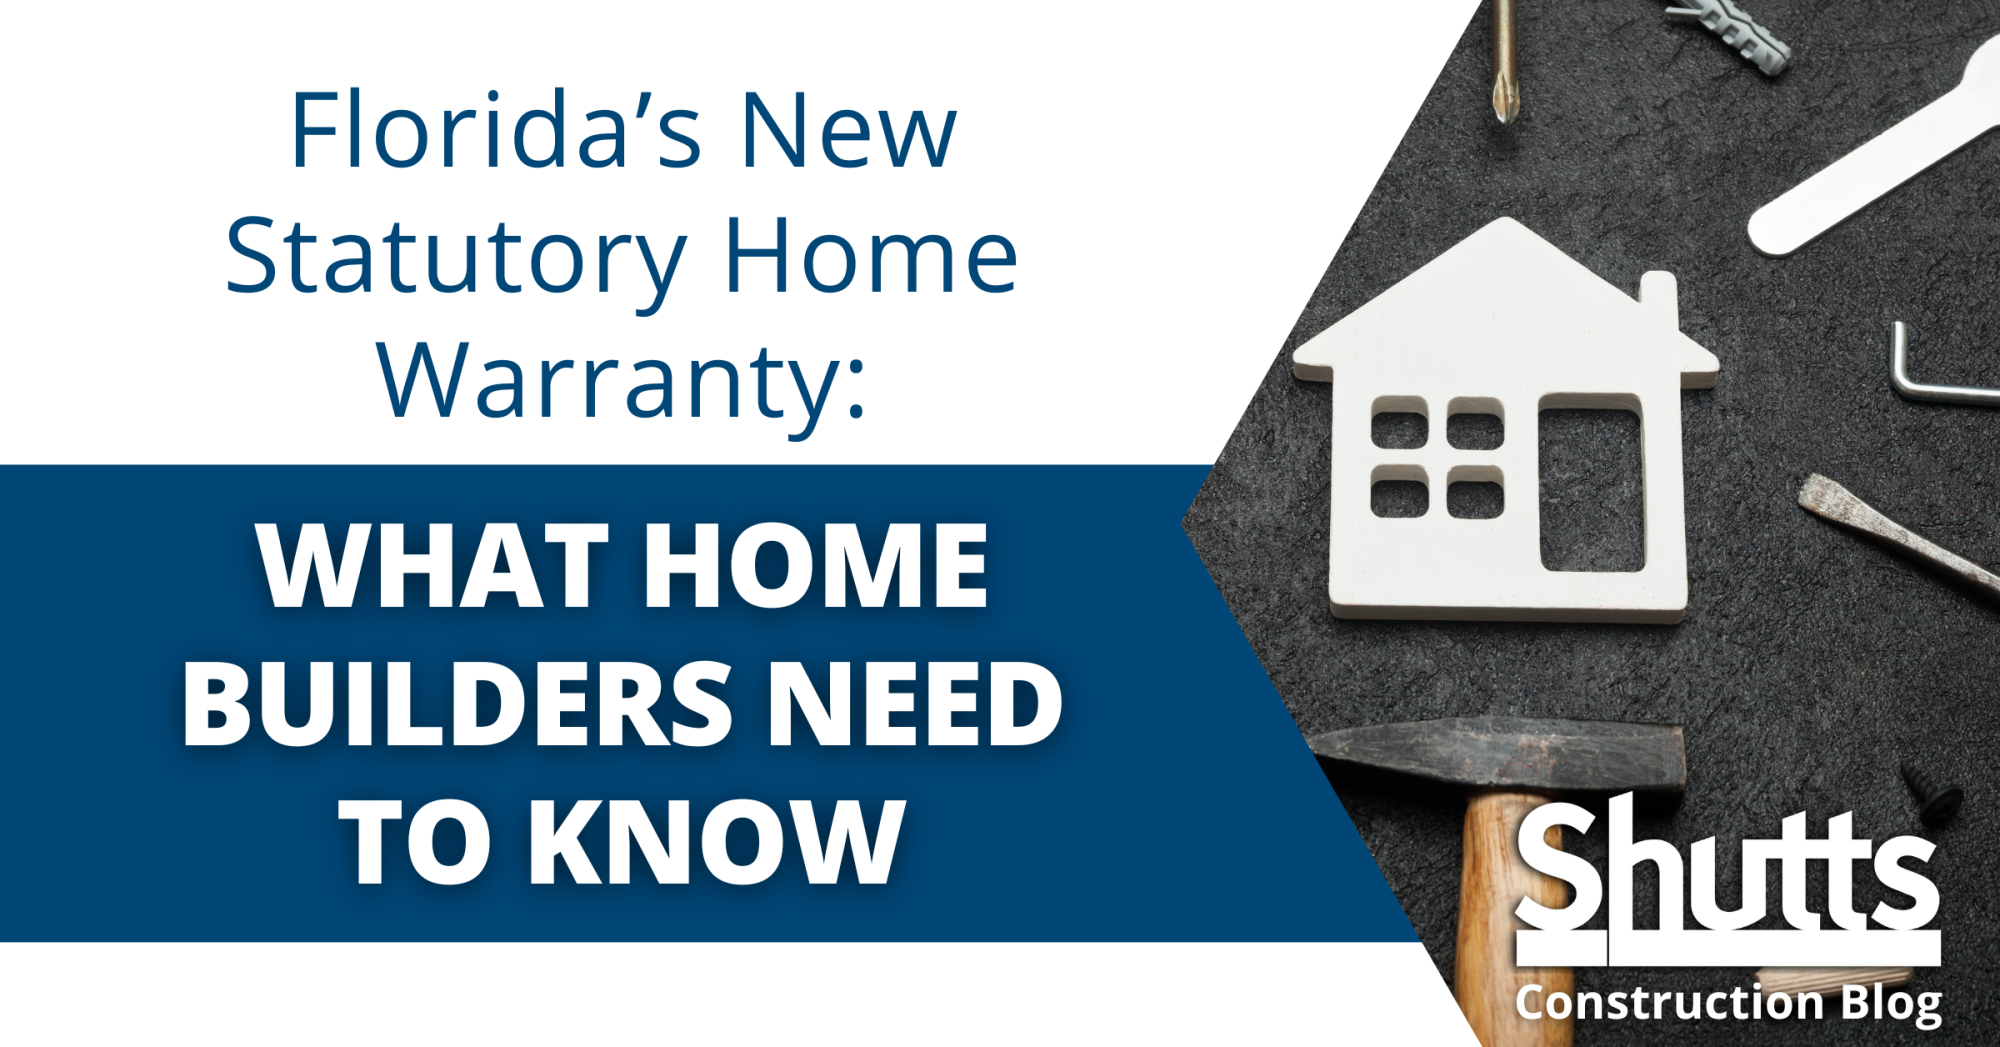 Florida Governor Ron DeSantis recently signed H.B. 623 into law on April 15, 2024, creating a new section 553.837, Florida Statutes, which will require builders to provide a one-year warranty for all newly constructed homes.  While many new construction home builders already offer a warranty, this statute requires that, starting July 1, 2025, all builders of newly constructed homes provide a statutory warranty, unless they already provide a written warranty that meets or exceeds the statutory warranty terms.